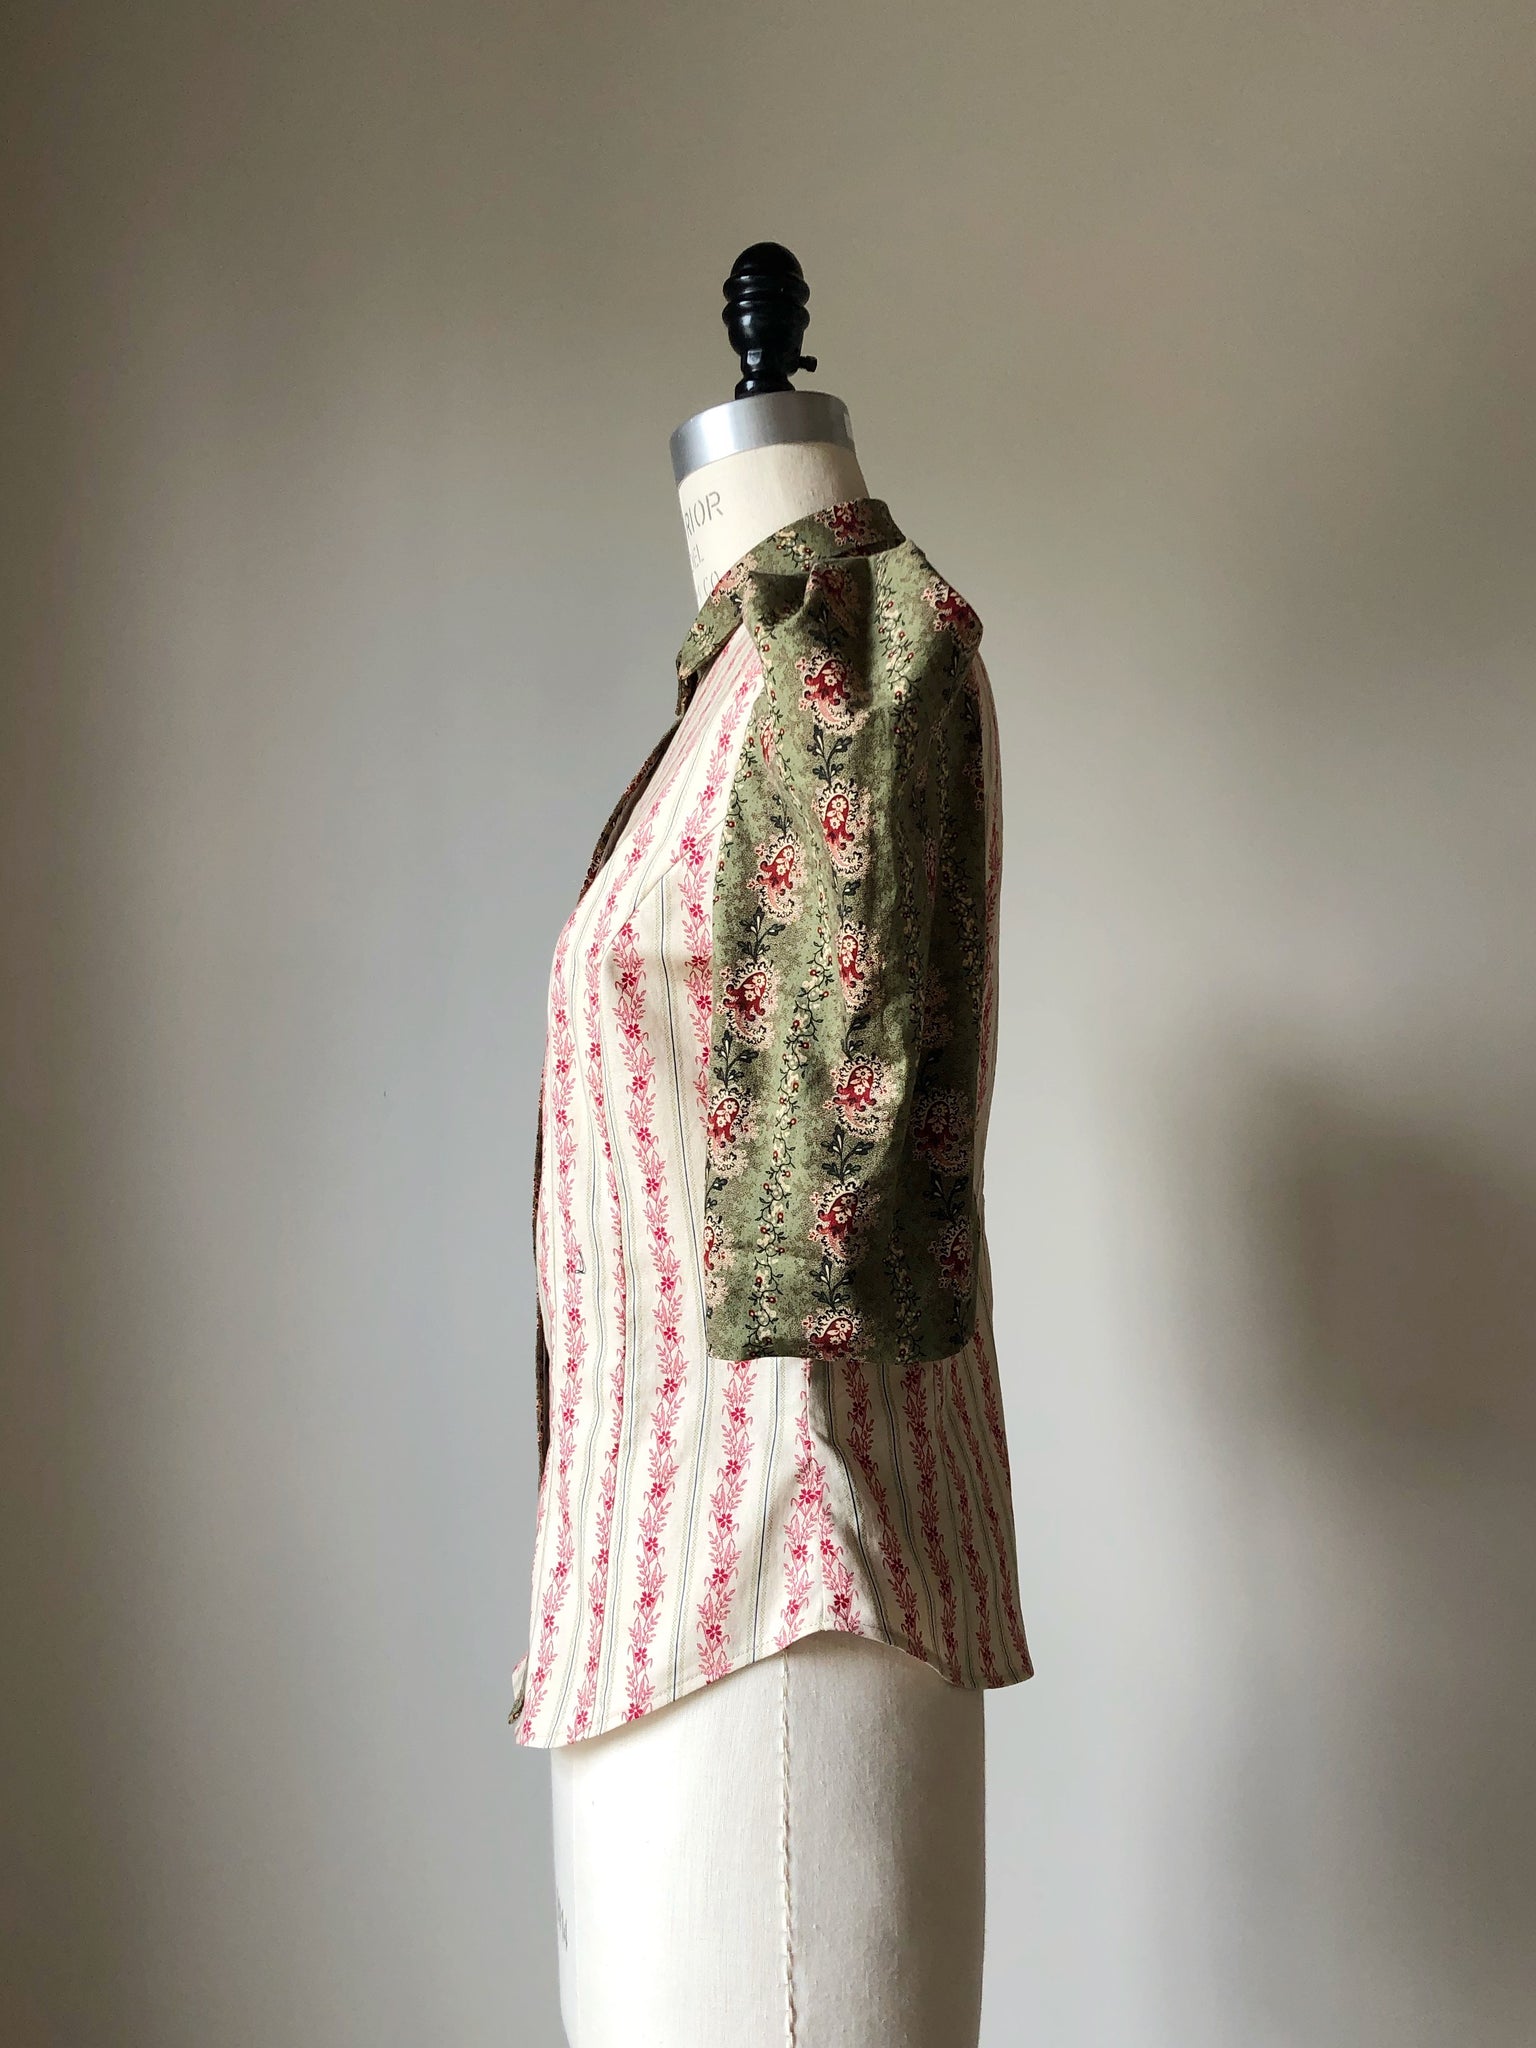 Lillian work shirt in 19th century reproduction prints